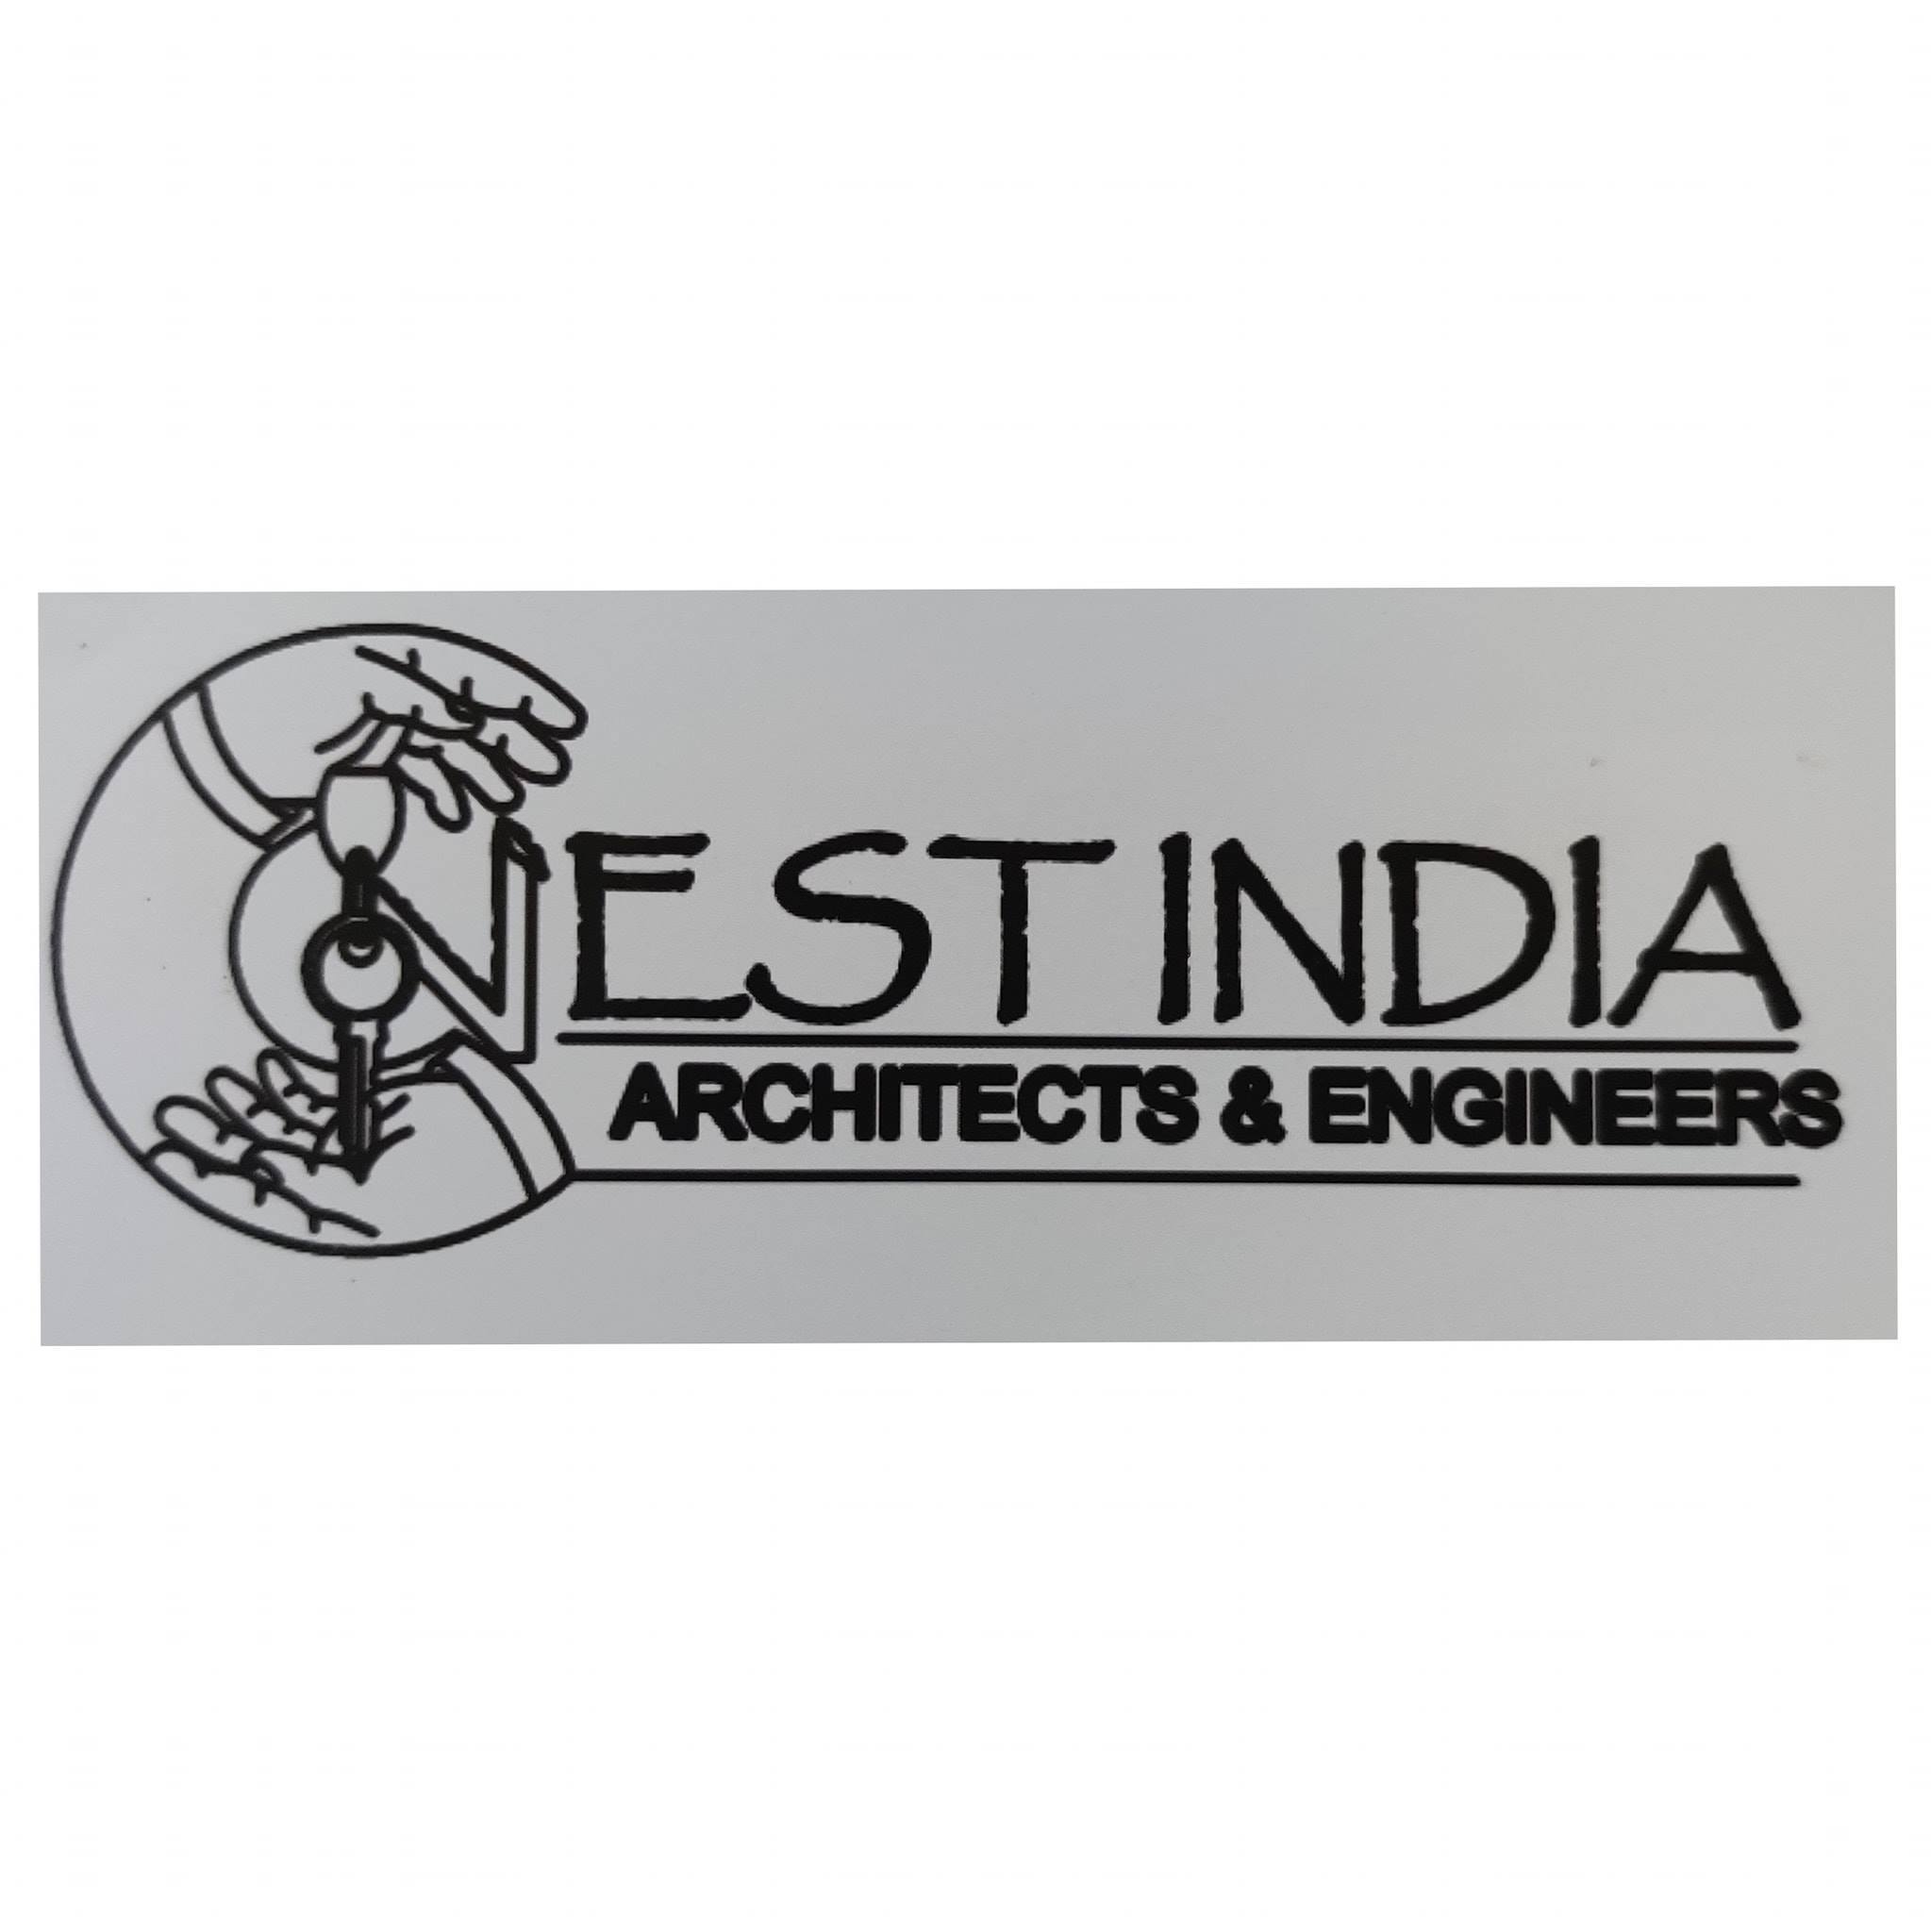 Nest India Architects and Engineers|Architect|Professional Services